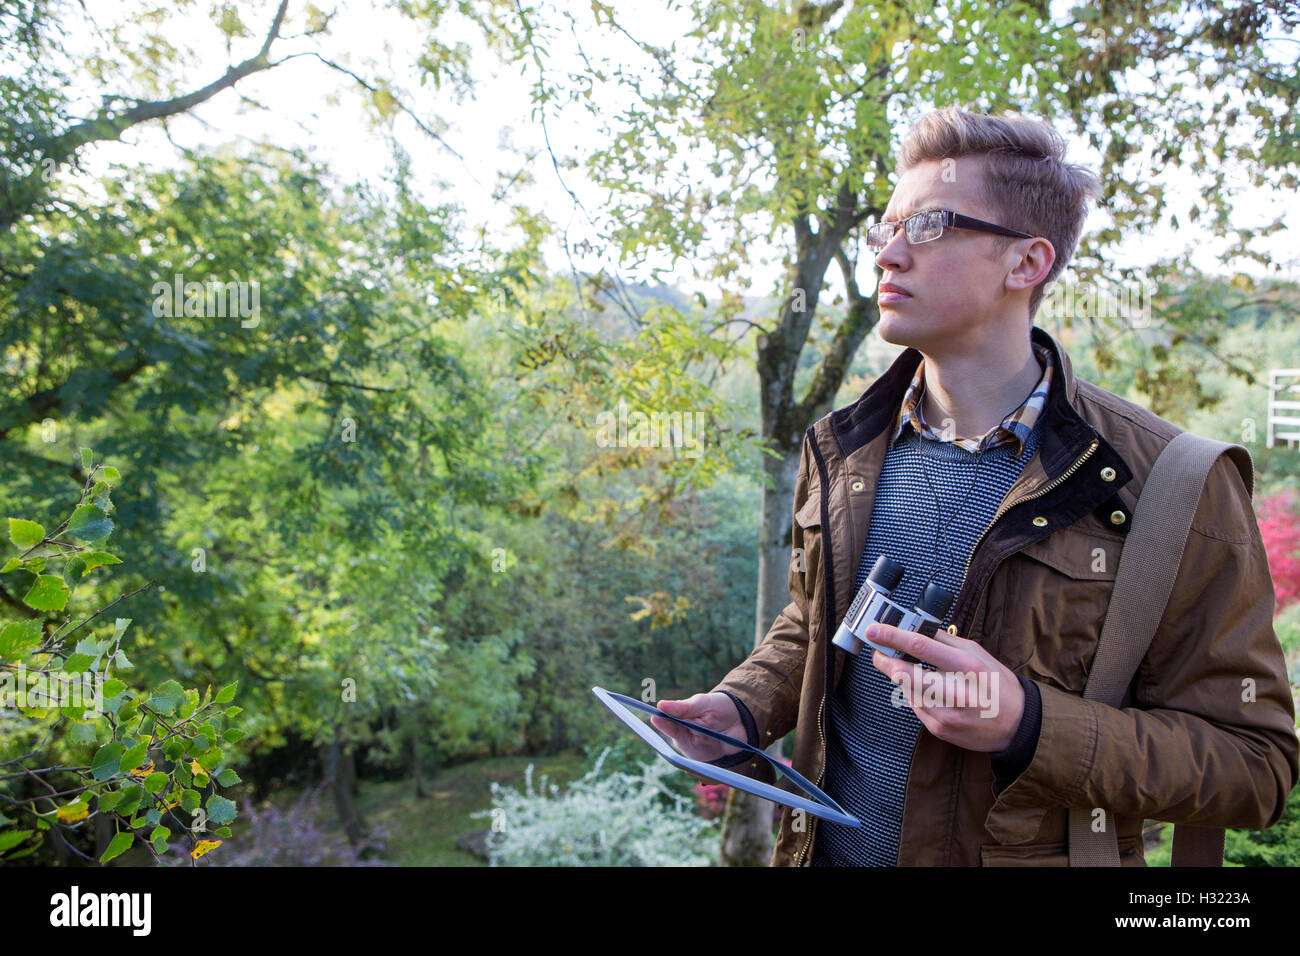 Young man analysing nature with binoculars. He is using a digital tablet for research. Stock Photo